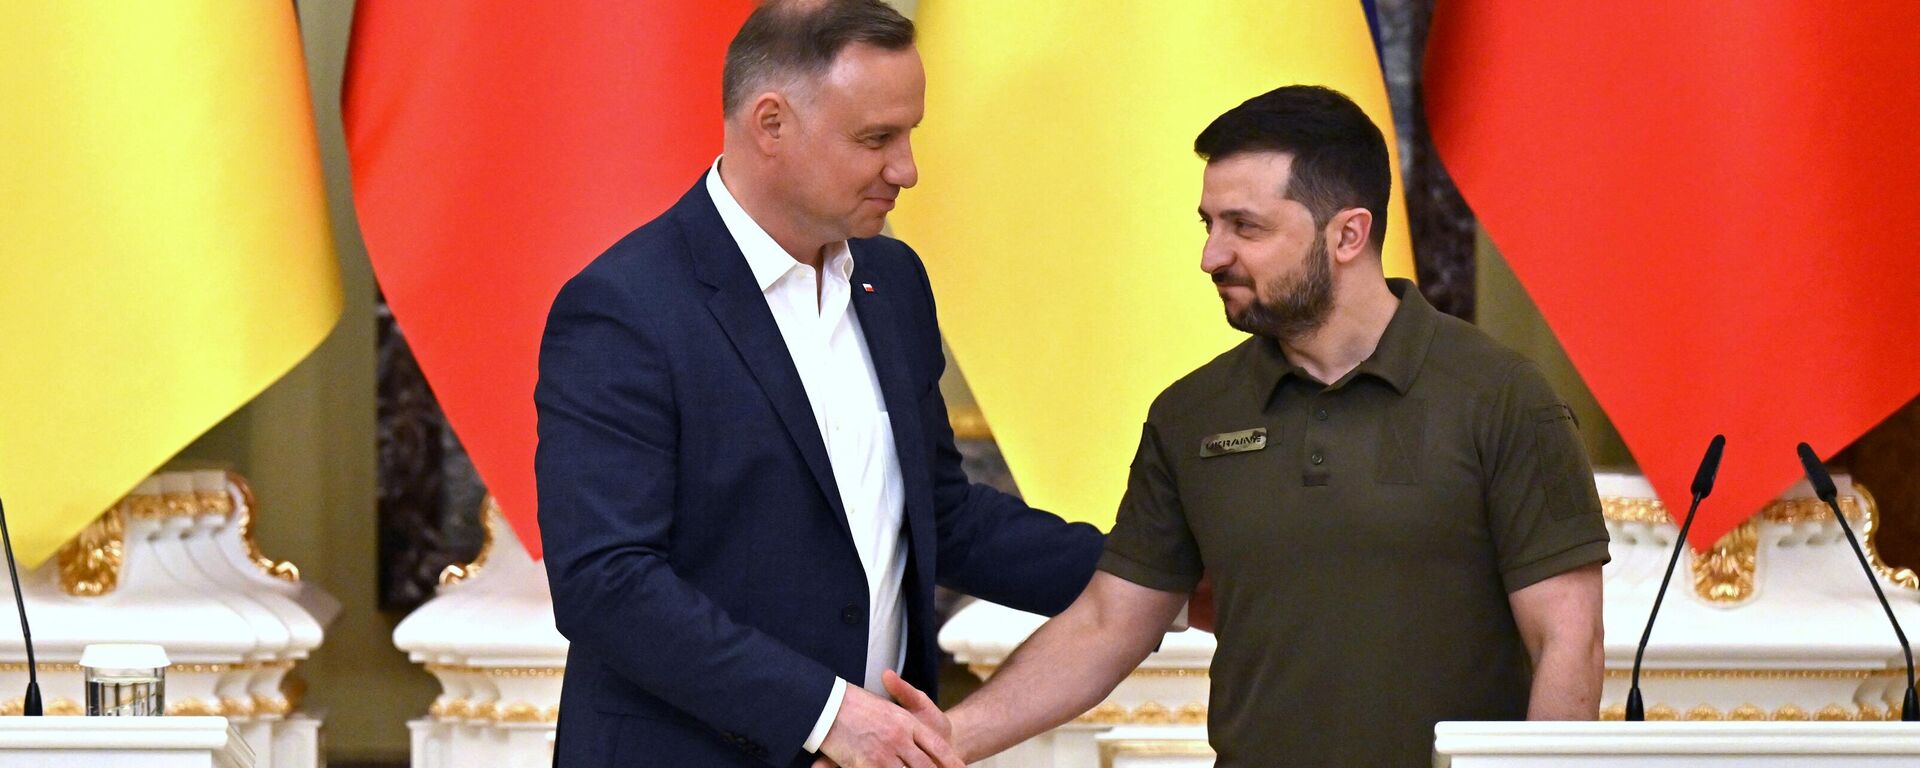 Ukrainian President Volodymyr Zelensky (R) and his Polish counterpart Andrzej Duda shake hands during a press conference following their talks in Kiev on May 22, 2022 - Sputnik International, 1920, 23.12.2022